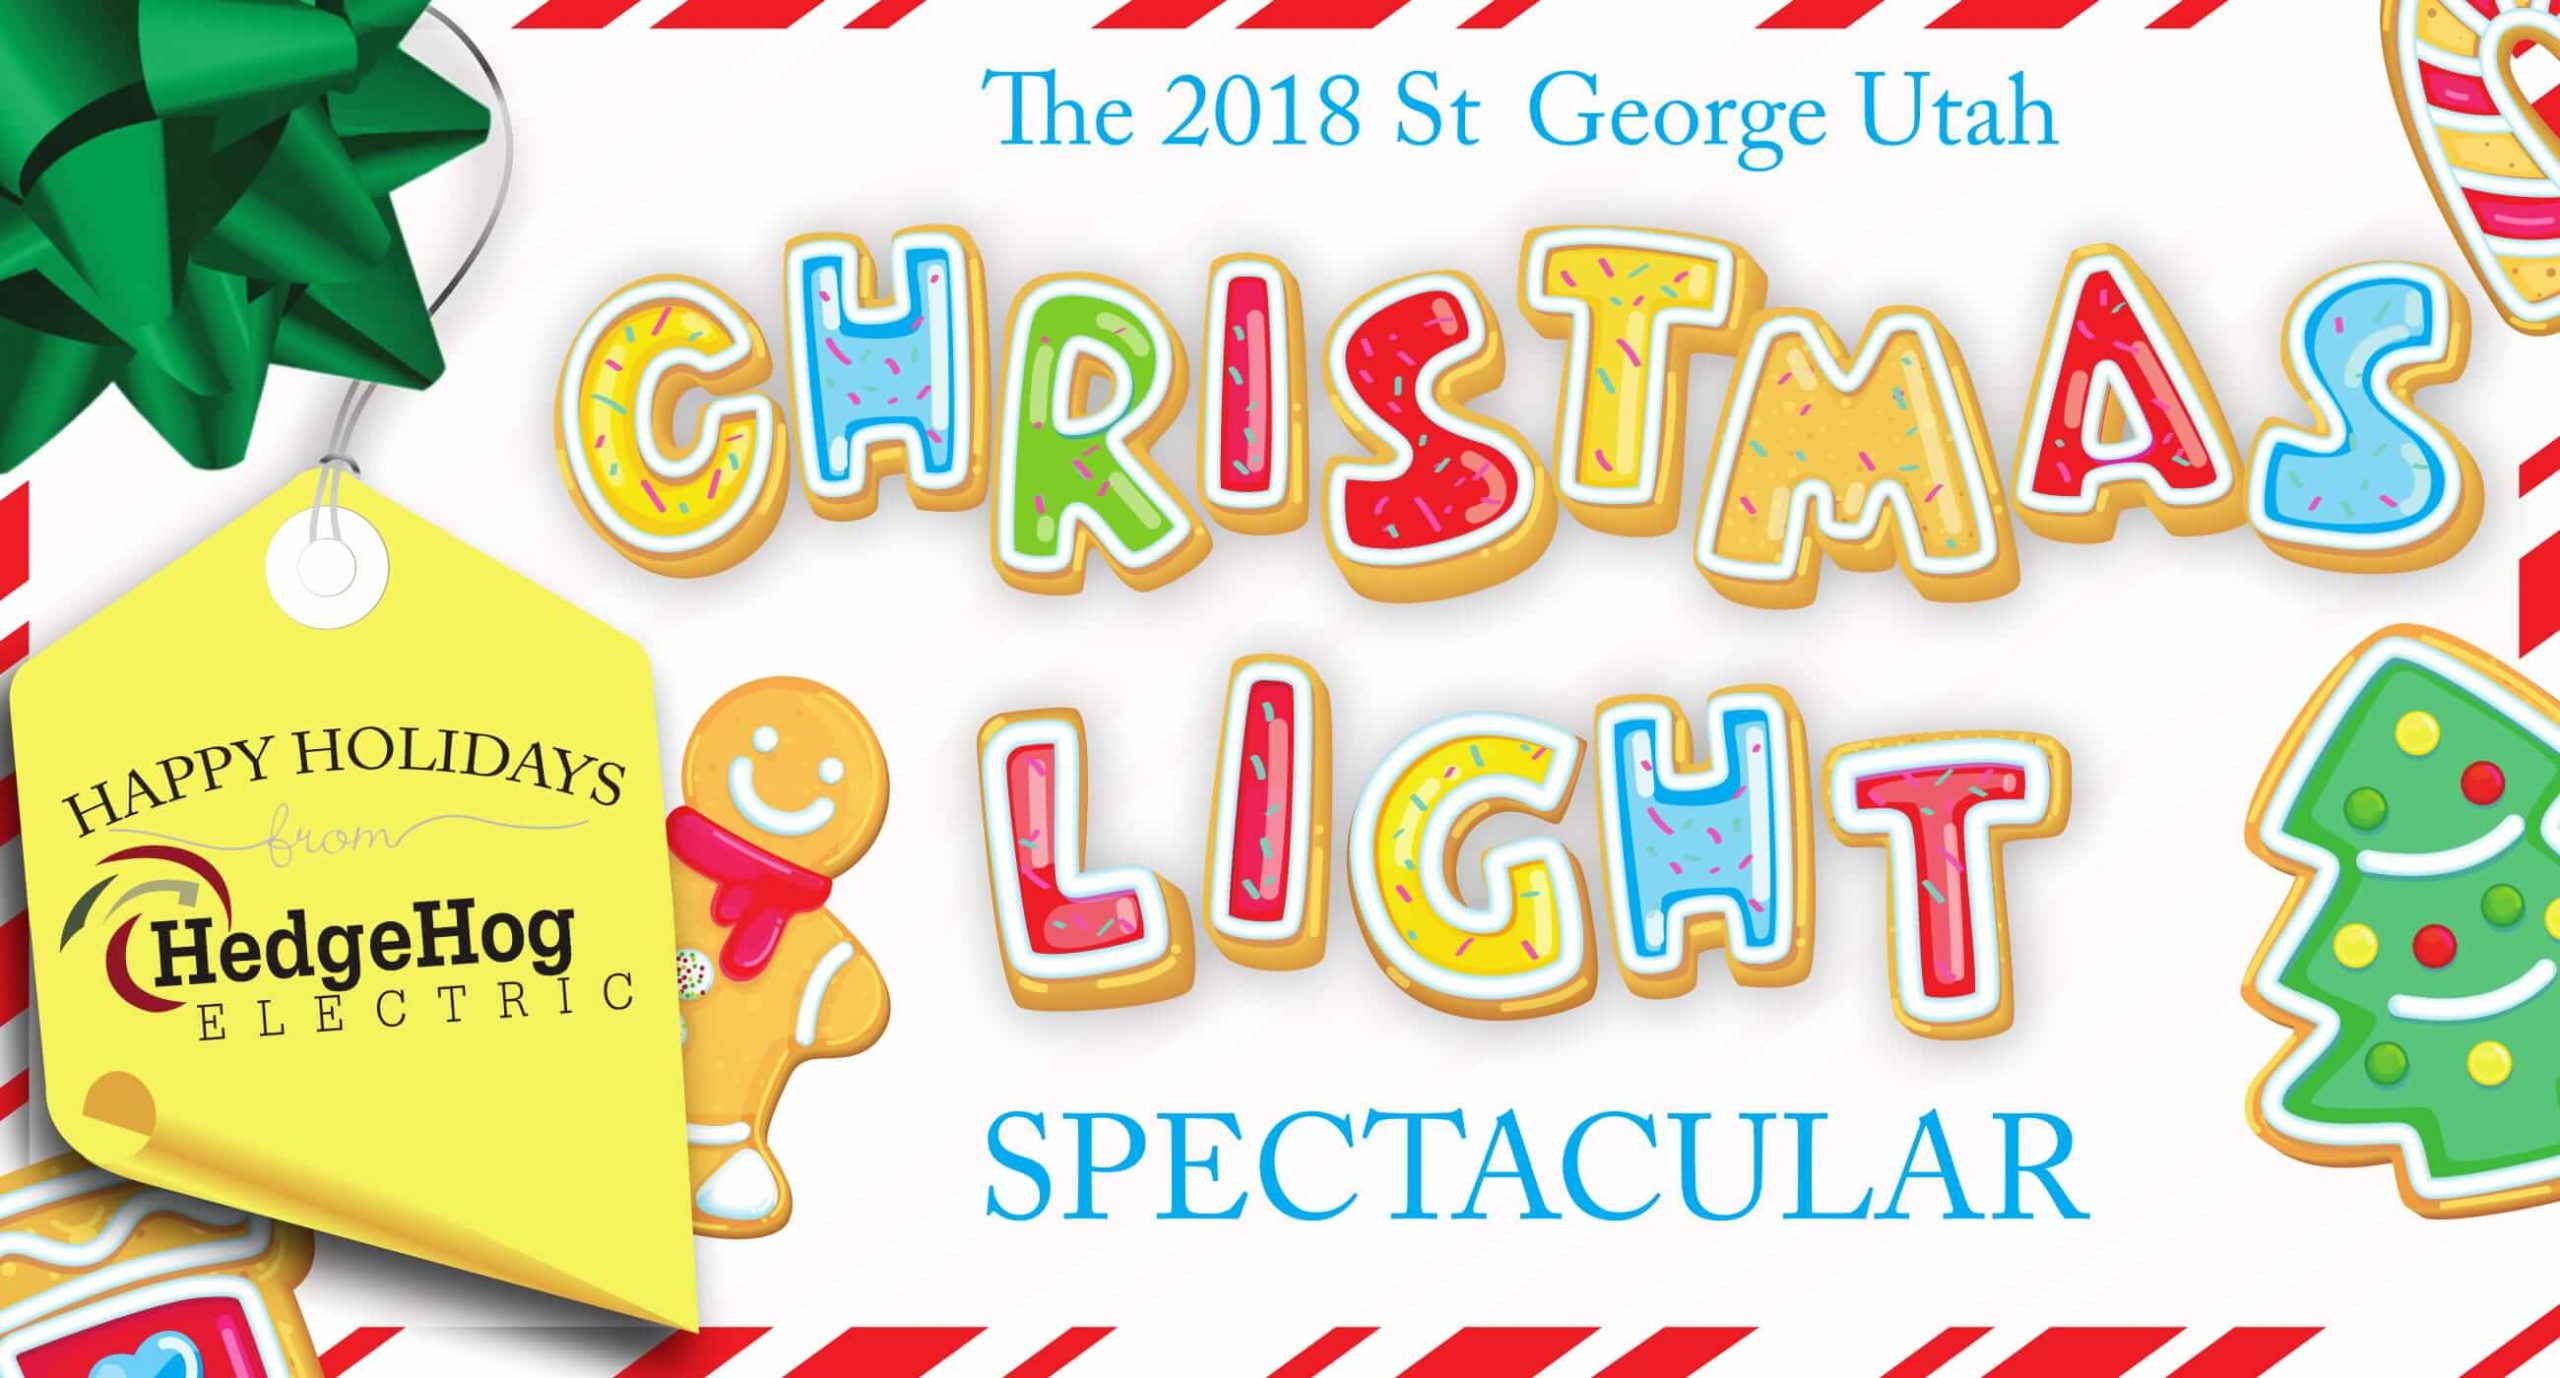 The 2018 St. George Christmas Light Spectacular by Hedgehog Electric | HedgeHog Electric